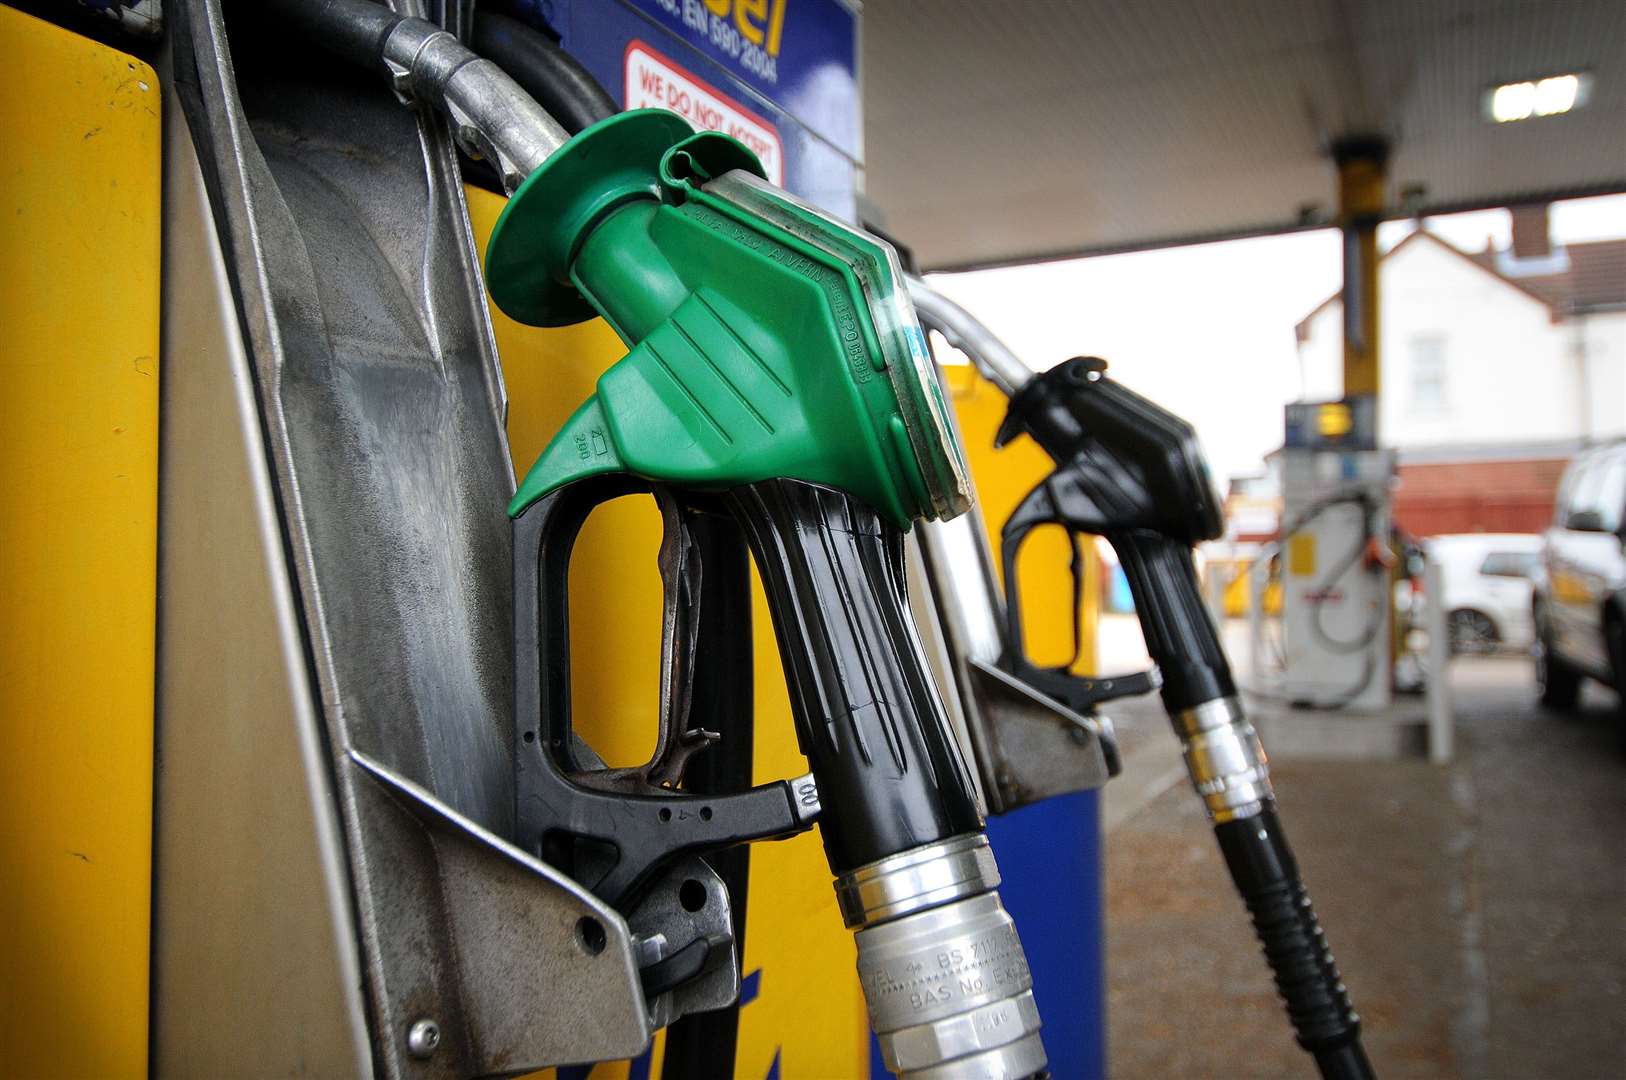 Petrol prices are also being pushed up by the war in Ukraine